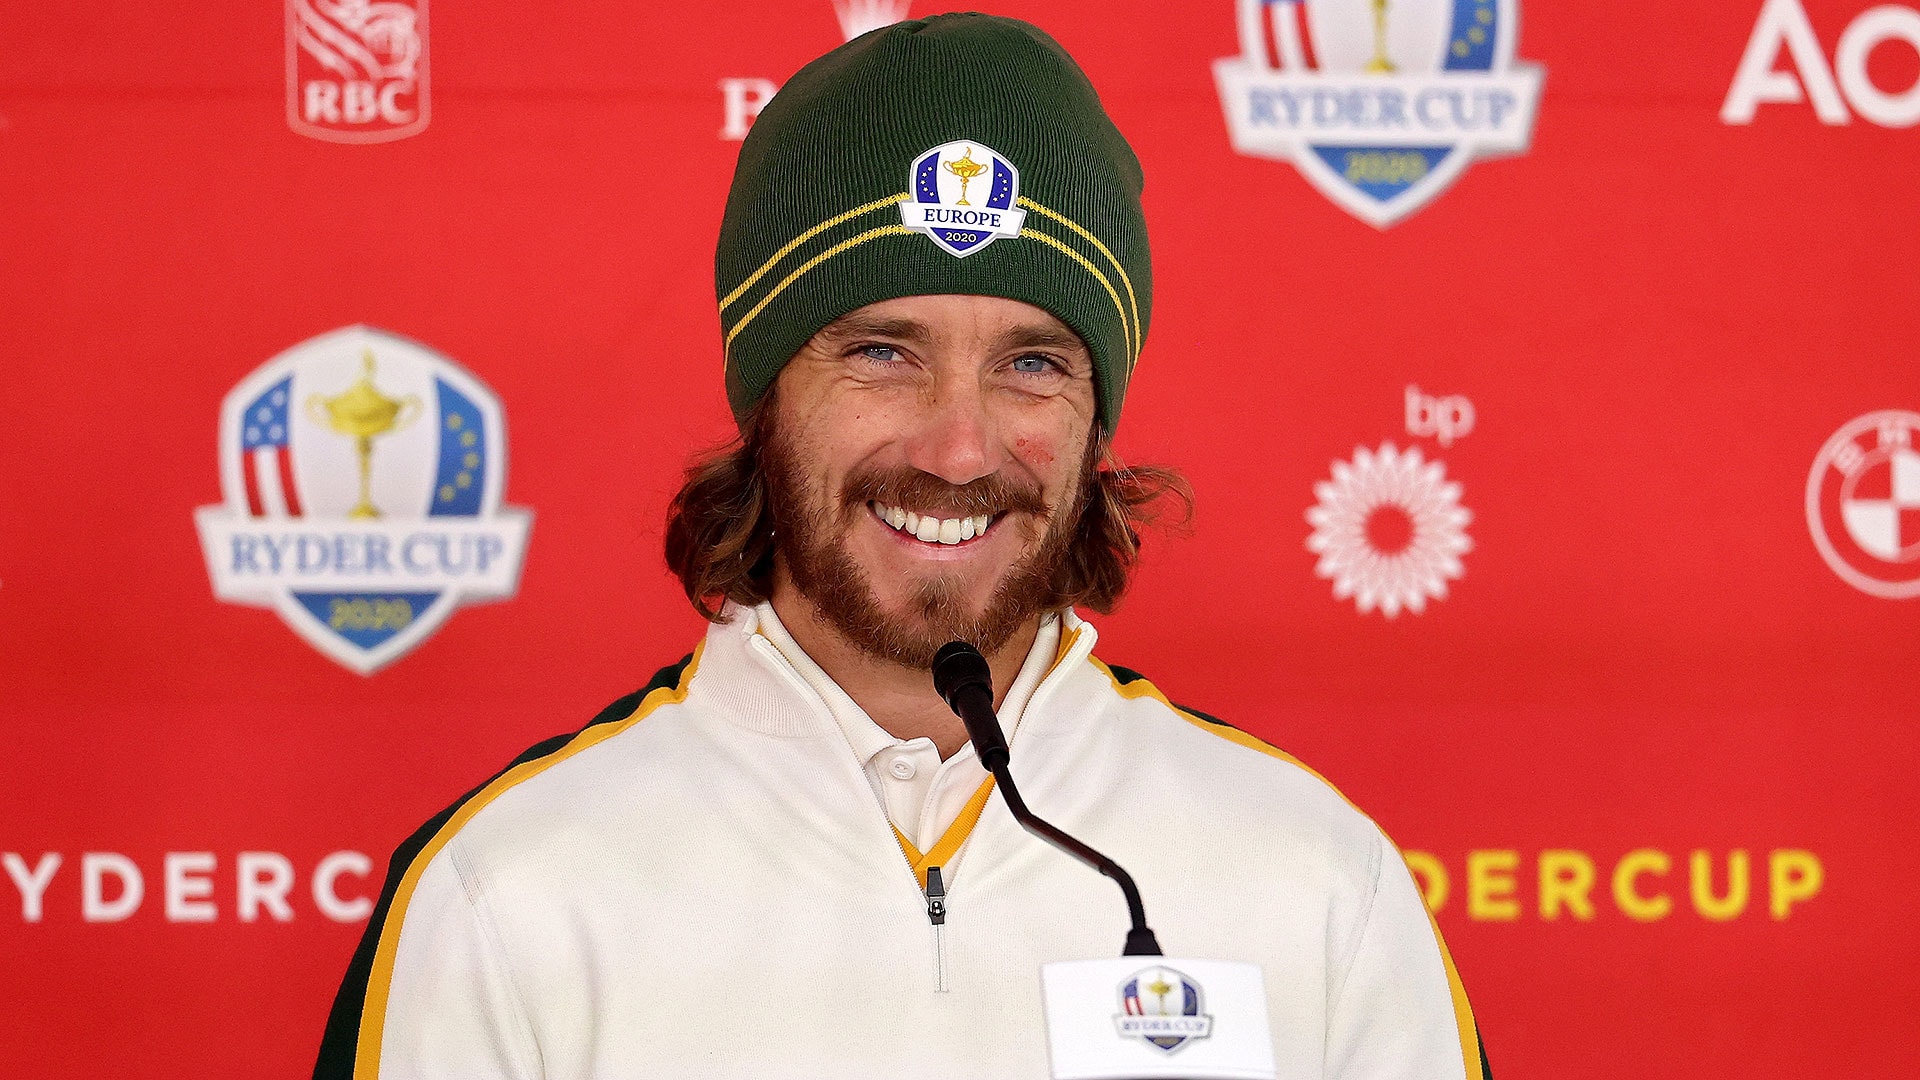 2020 Ryder Cup: Europeans sporting Green Bay Packers colors during Wednesday practice